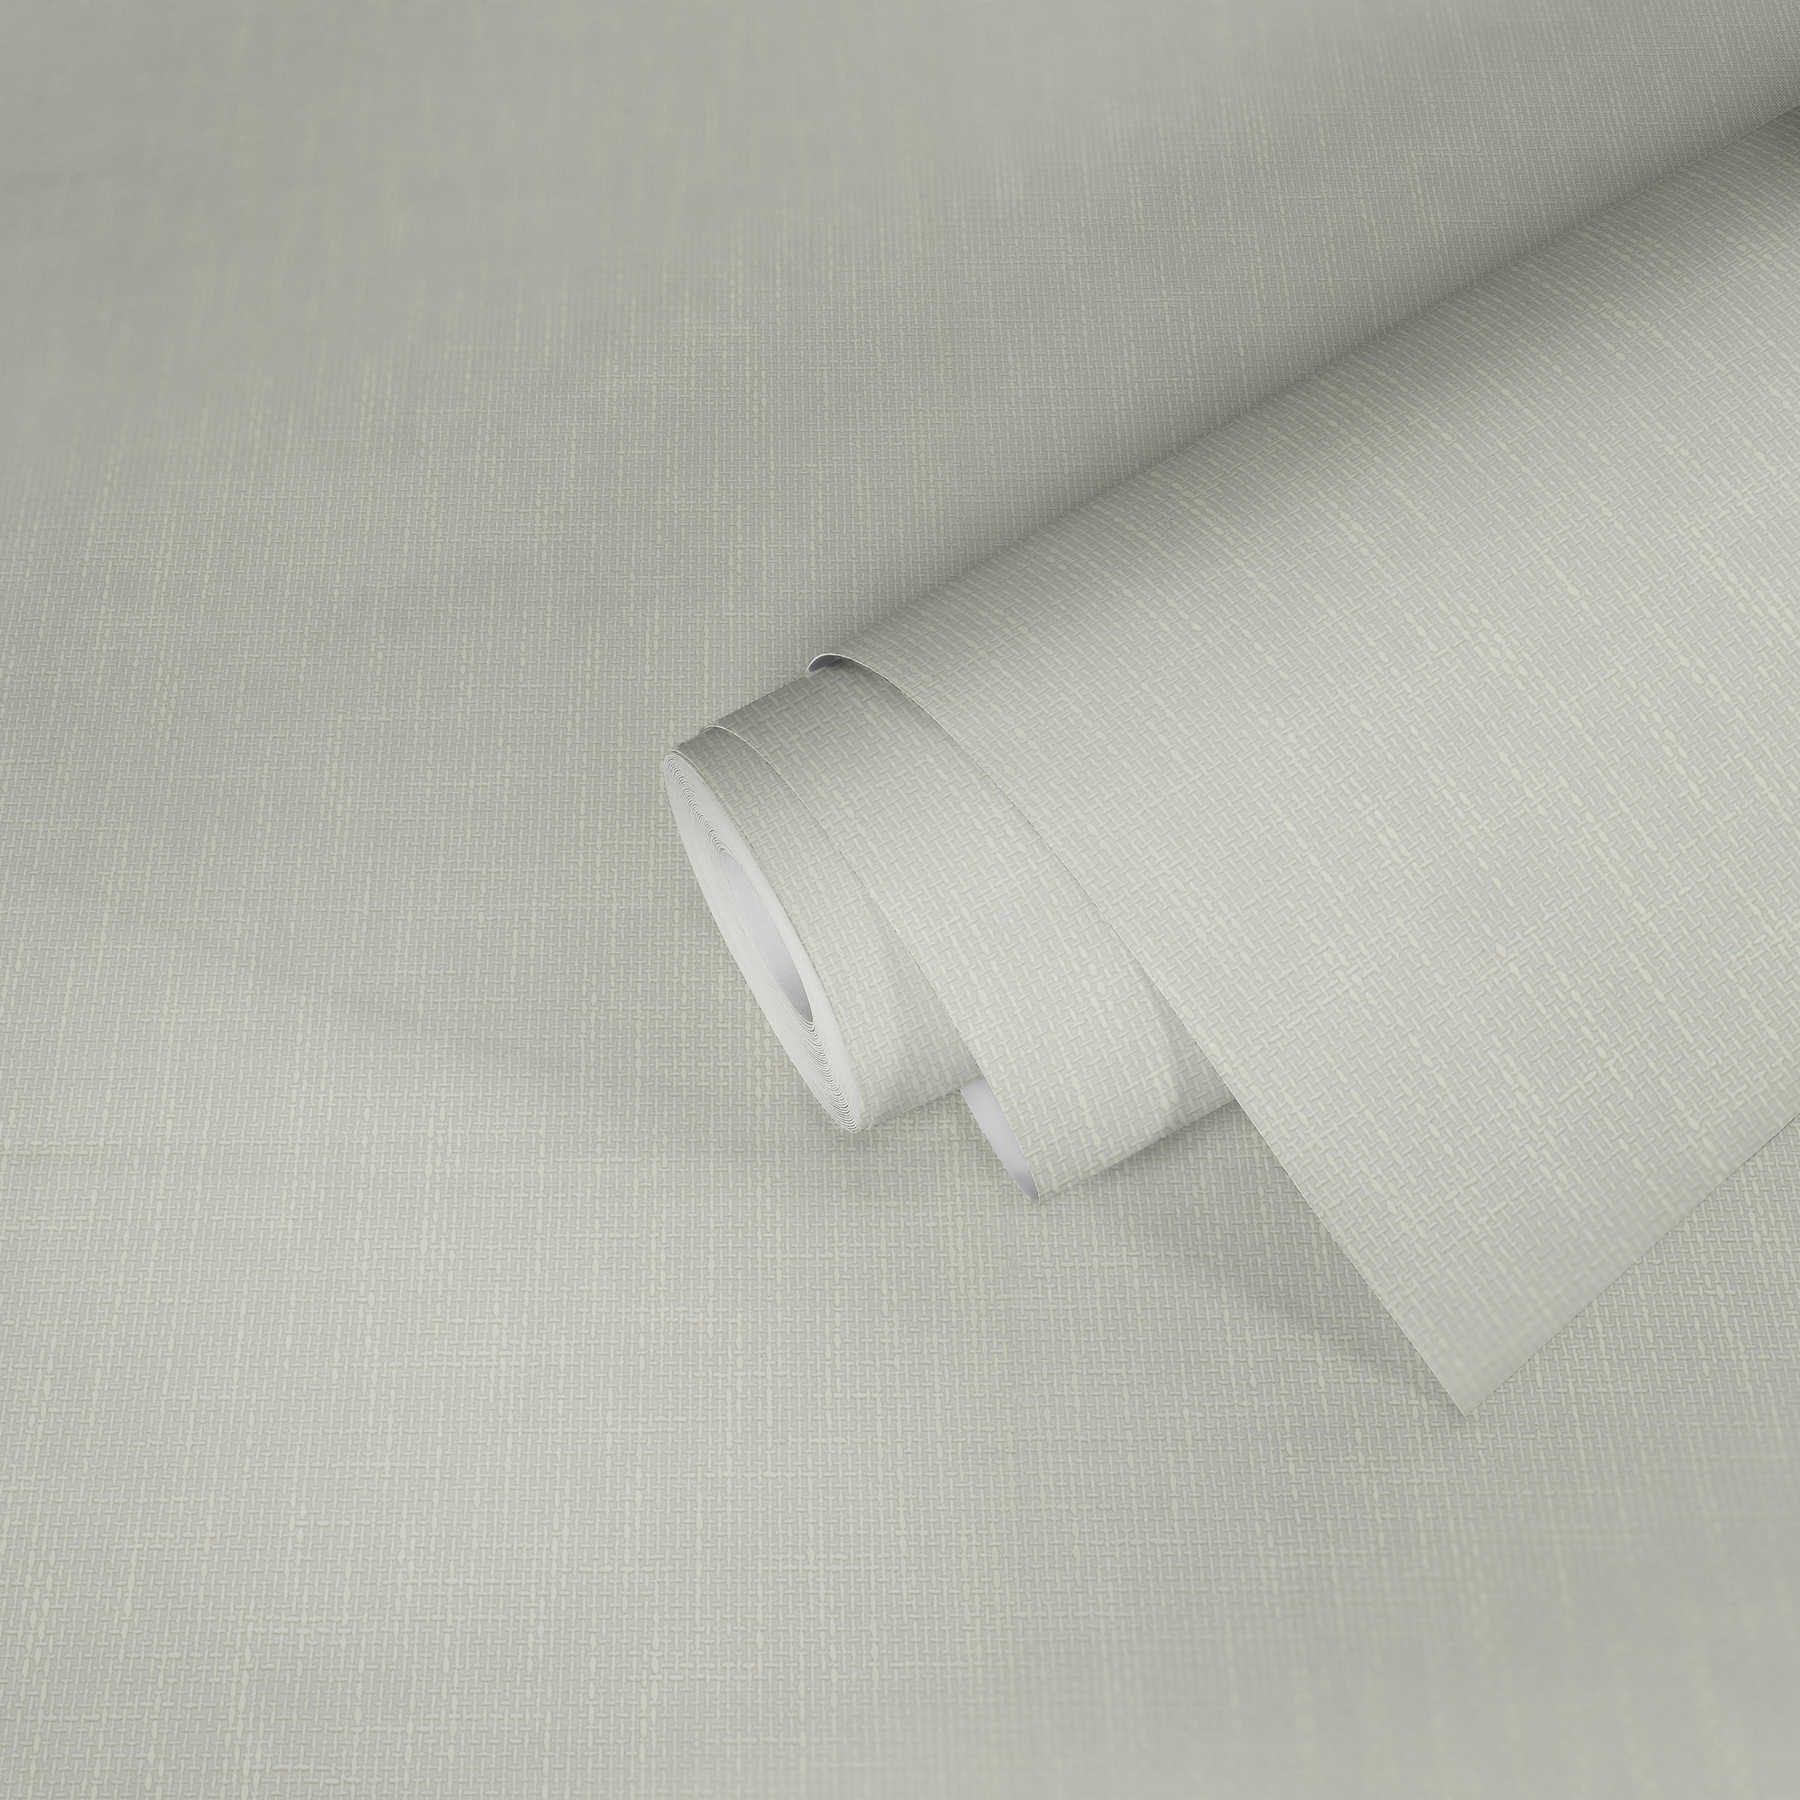             Profile wallpaper with fabric structure in linen look - white
        